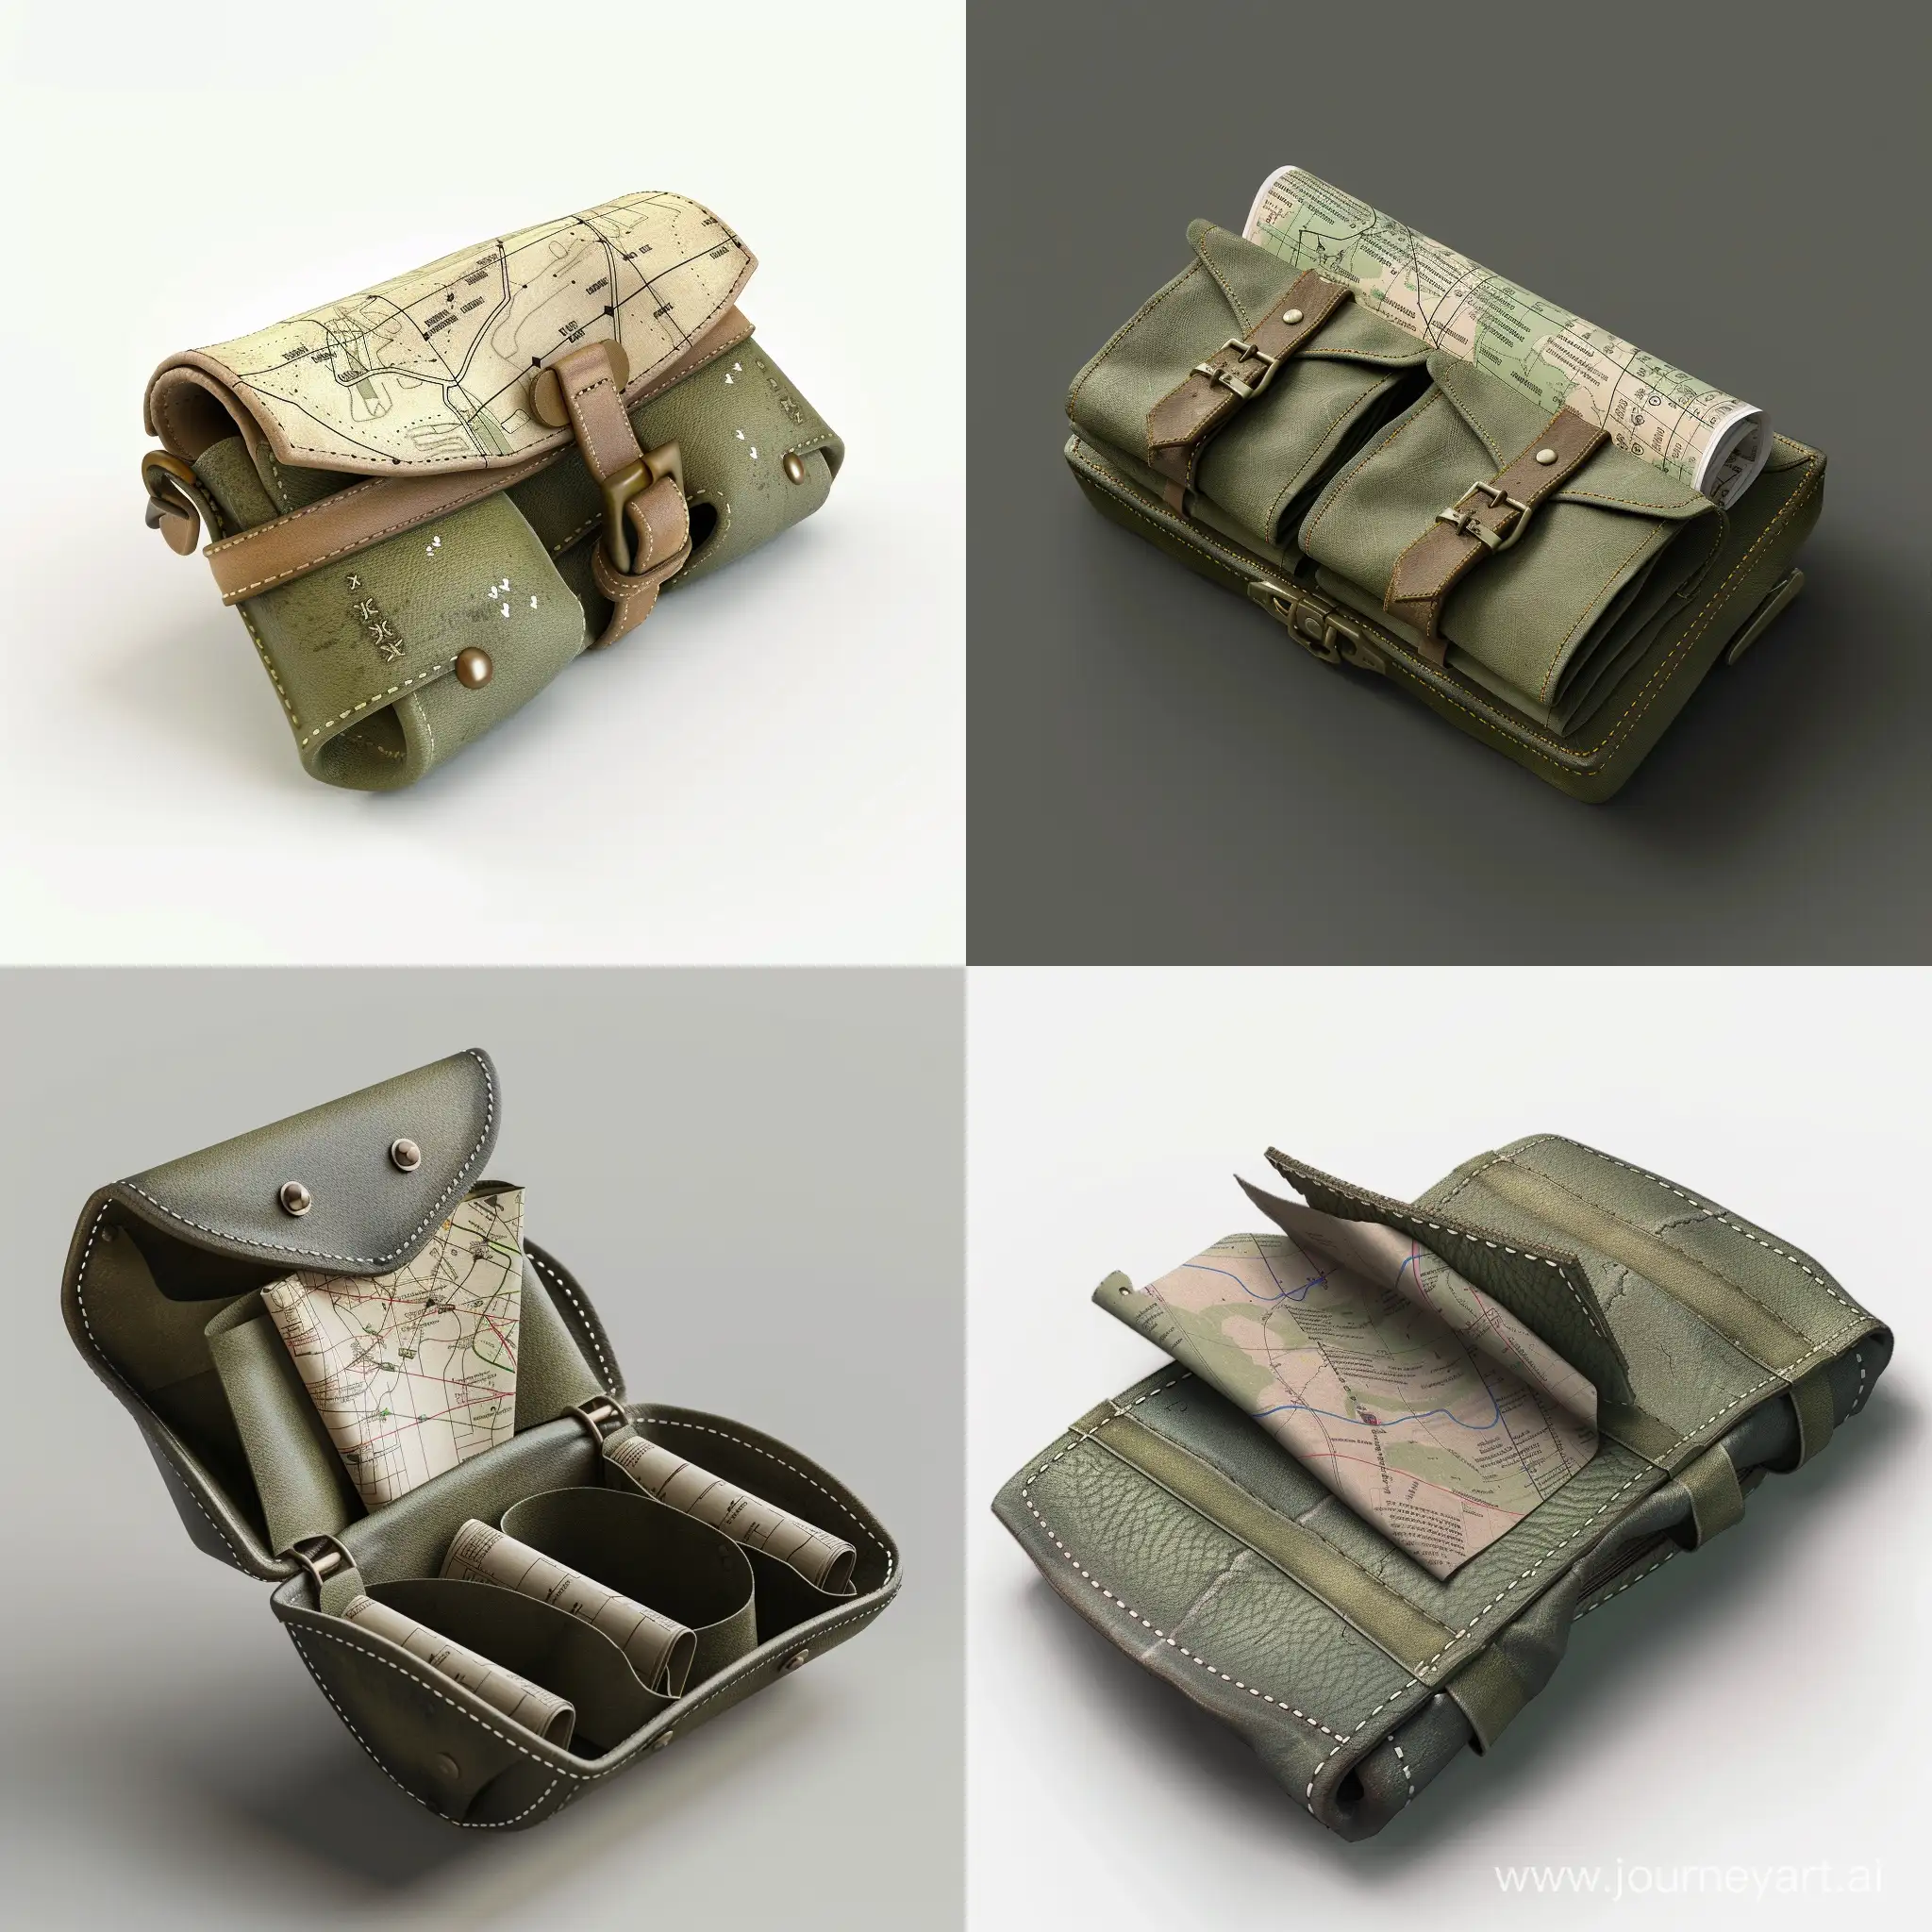 Isometric-Military-Mapping-Kit-in-Leather-Pouch-Realistic-3D-Render